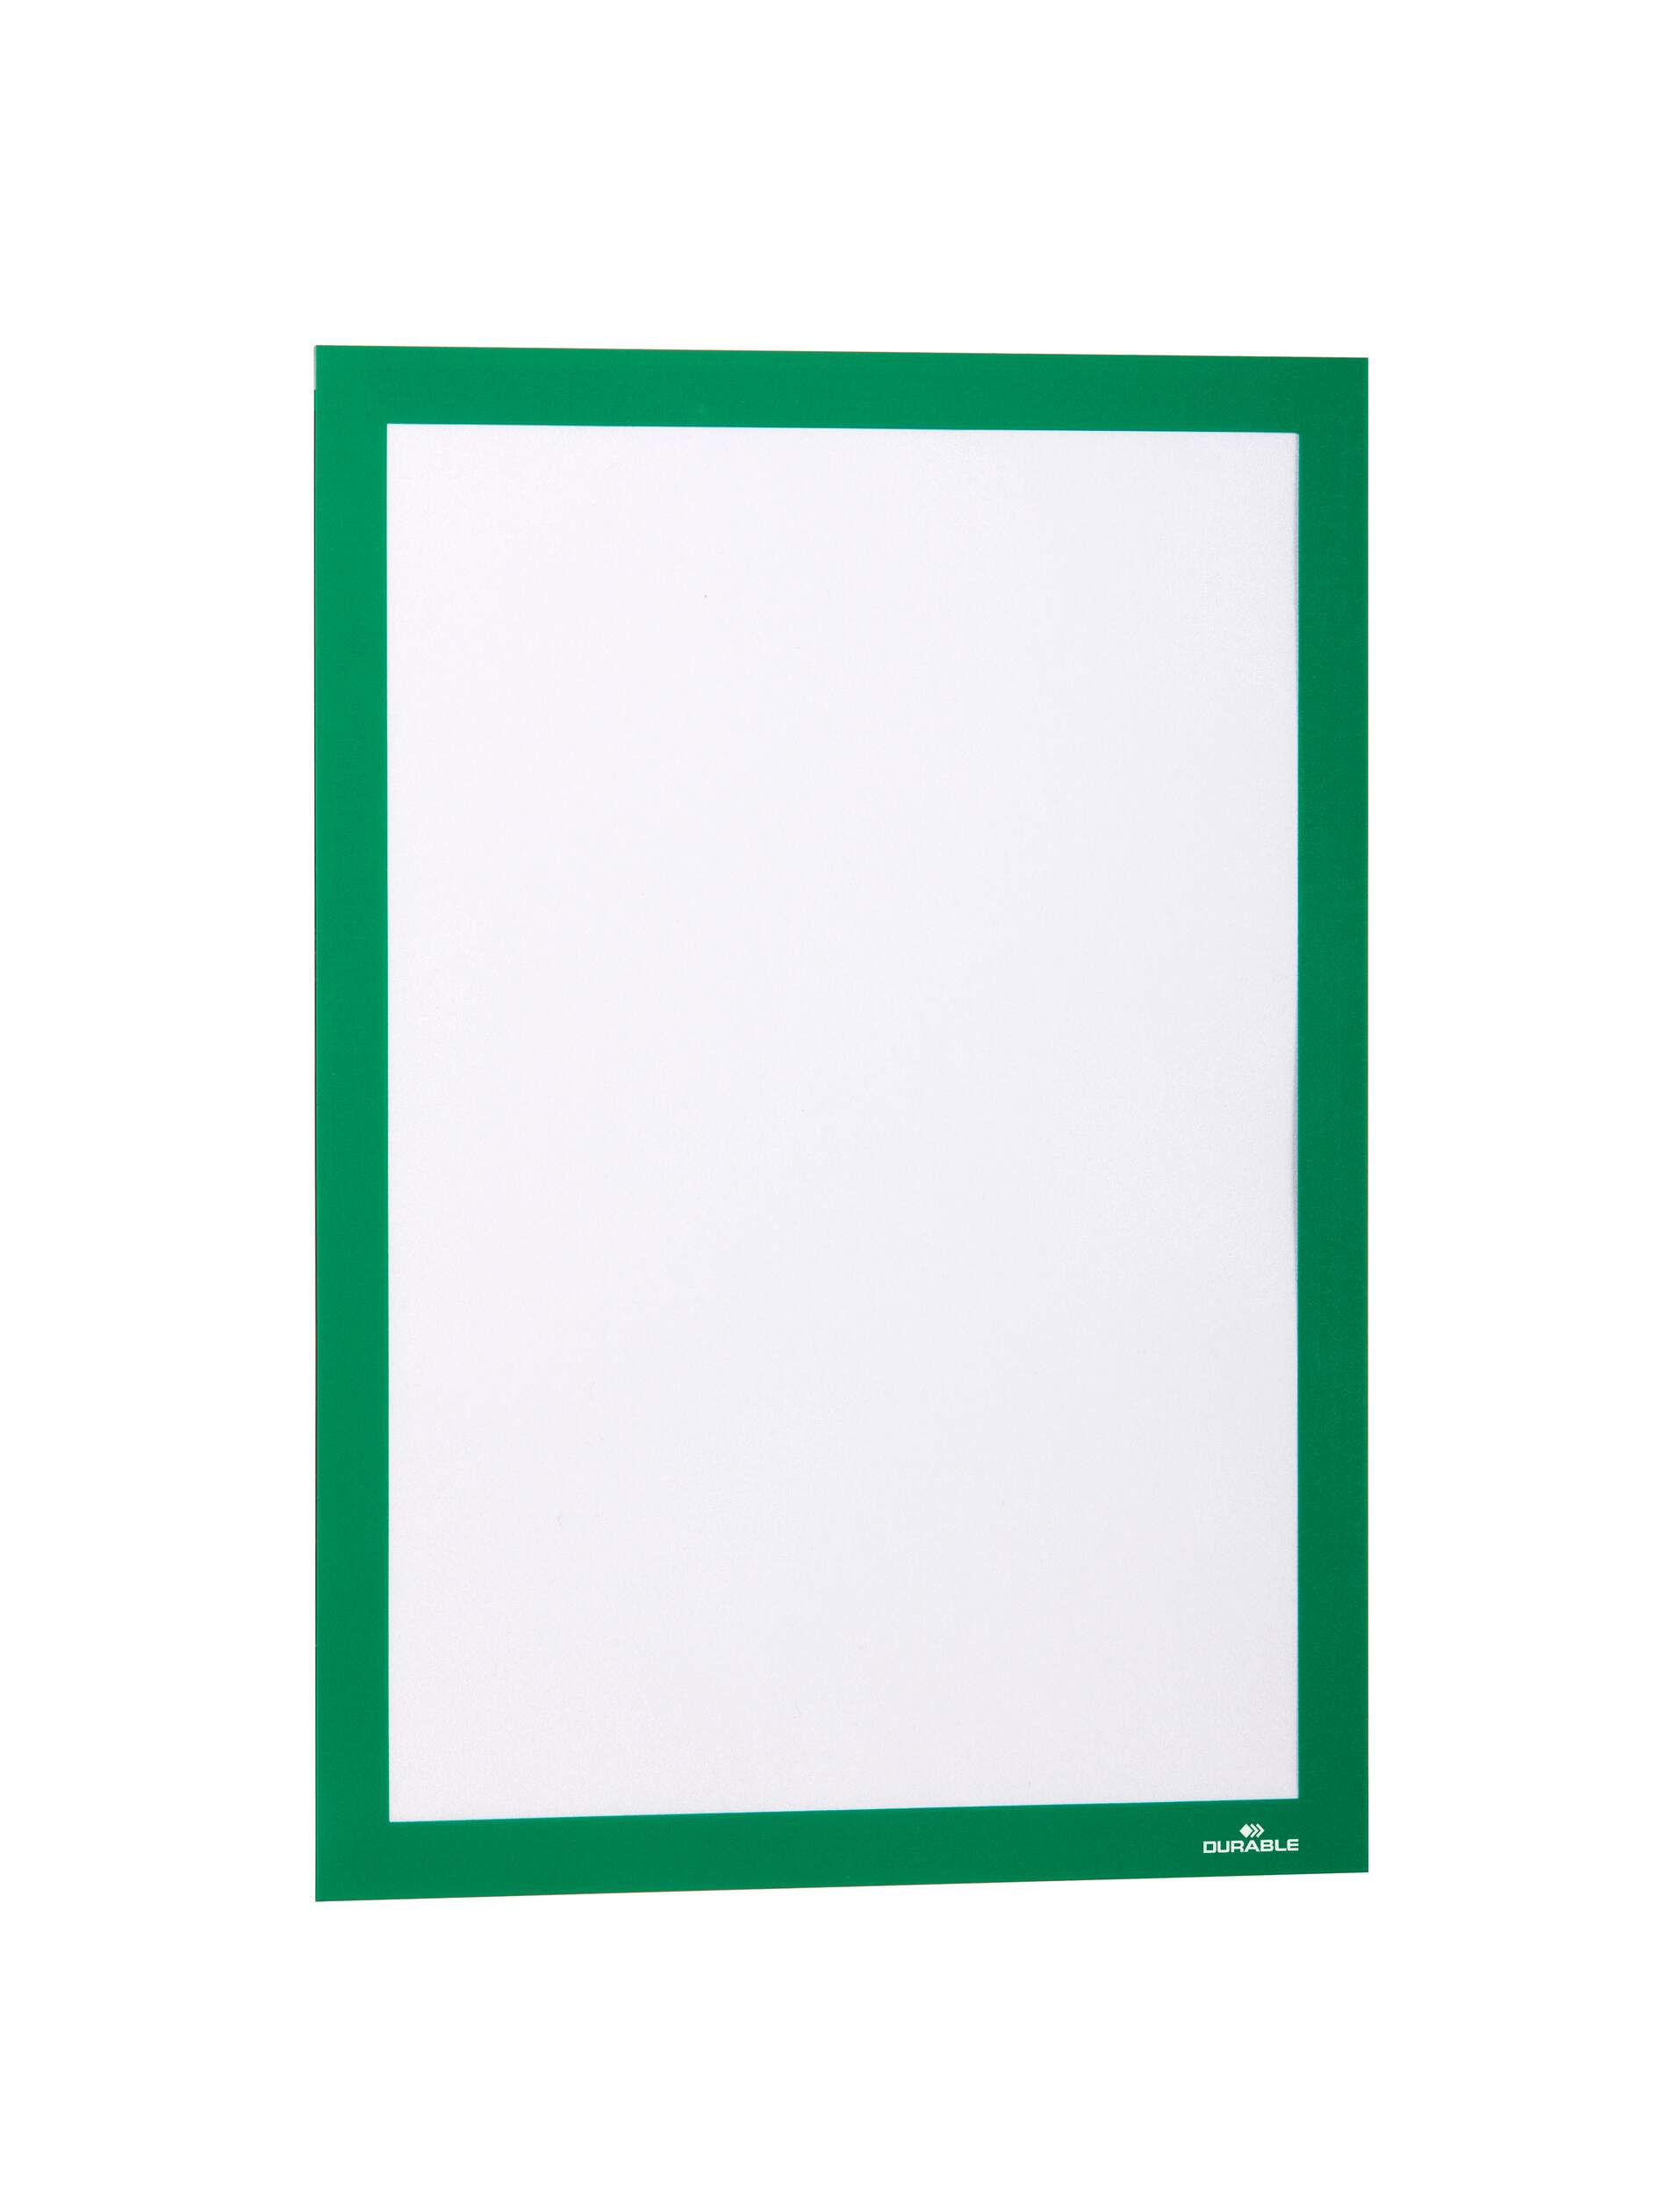 A4 fprmato double-sided adhesive magnetic frame